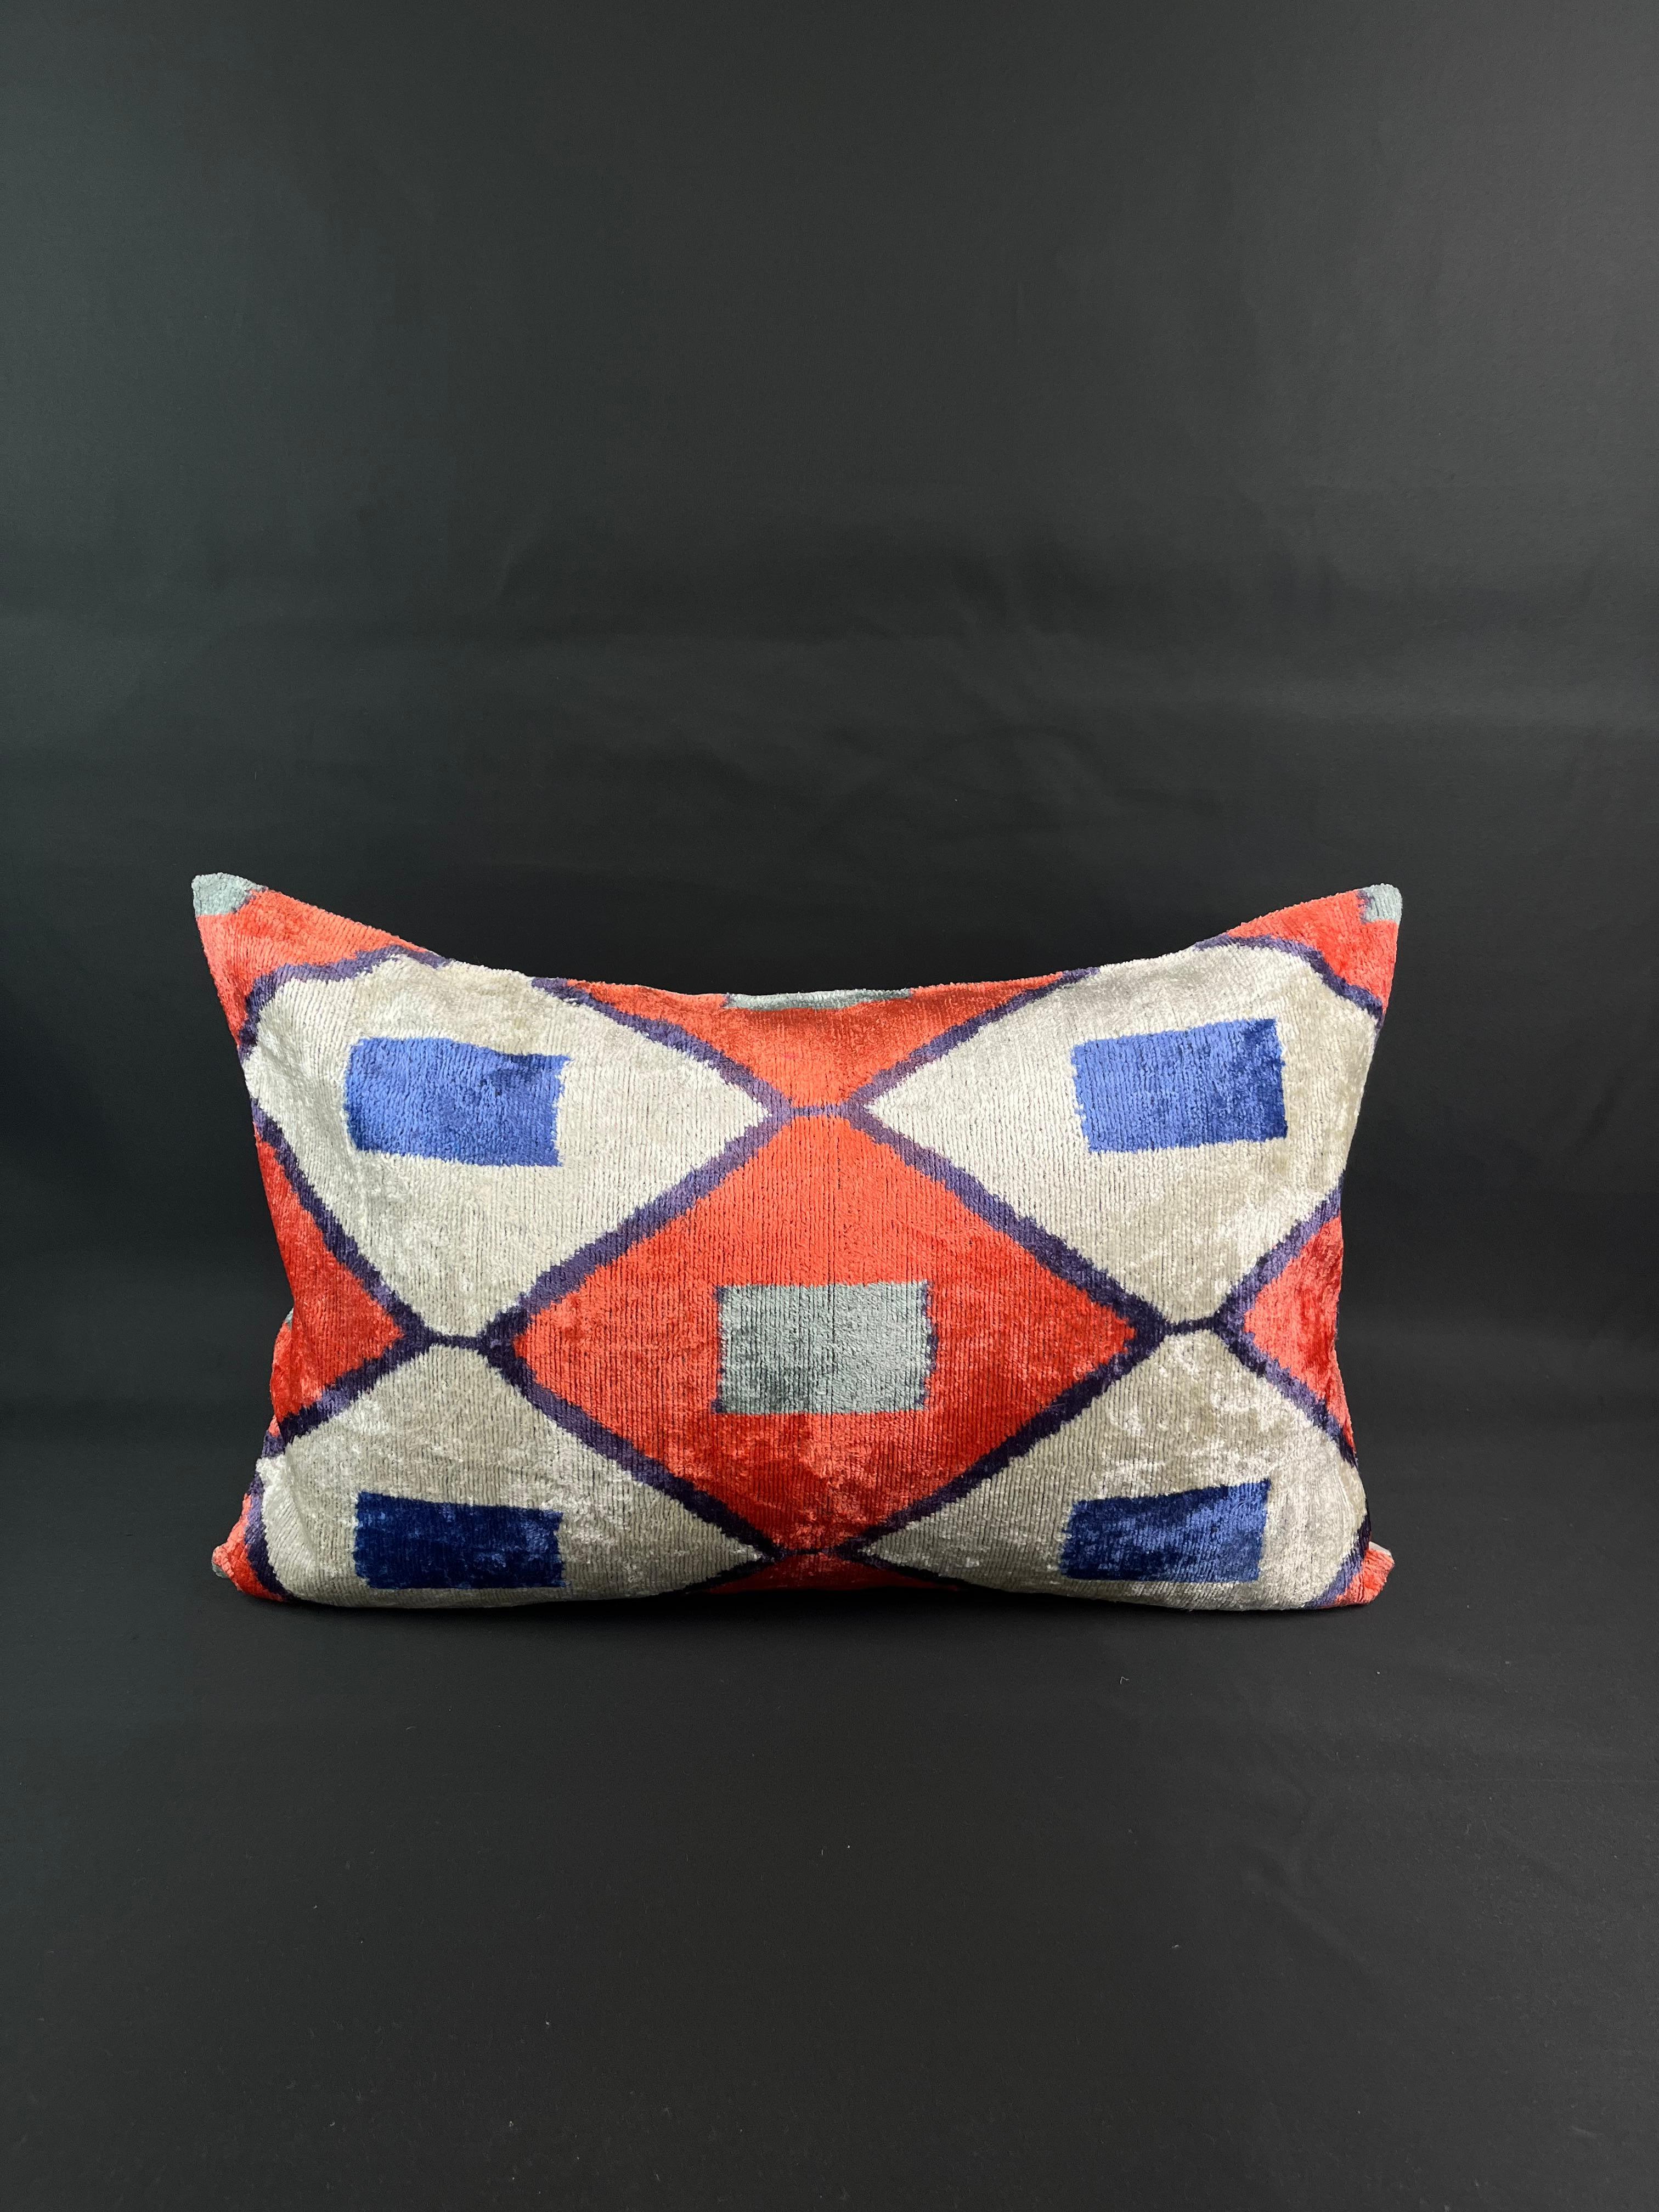 Red and Blue Geometric Design Velvet Silk Ikat Pillow Cover In New Condition For Sale In Houston, TX